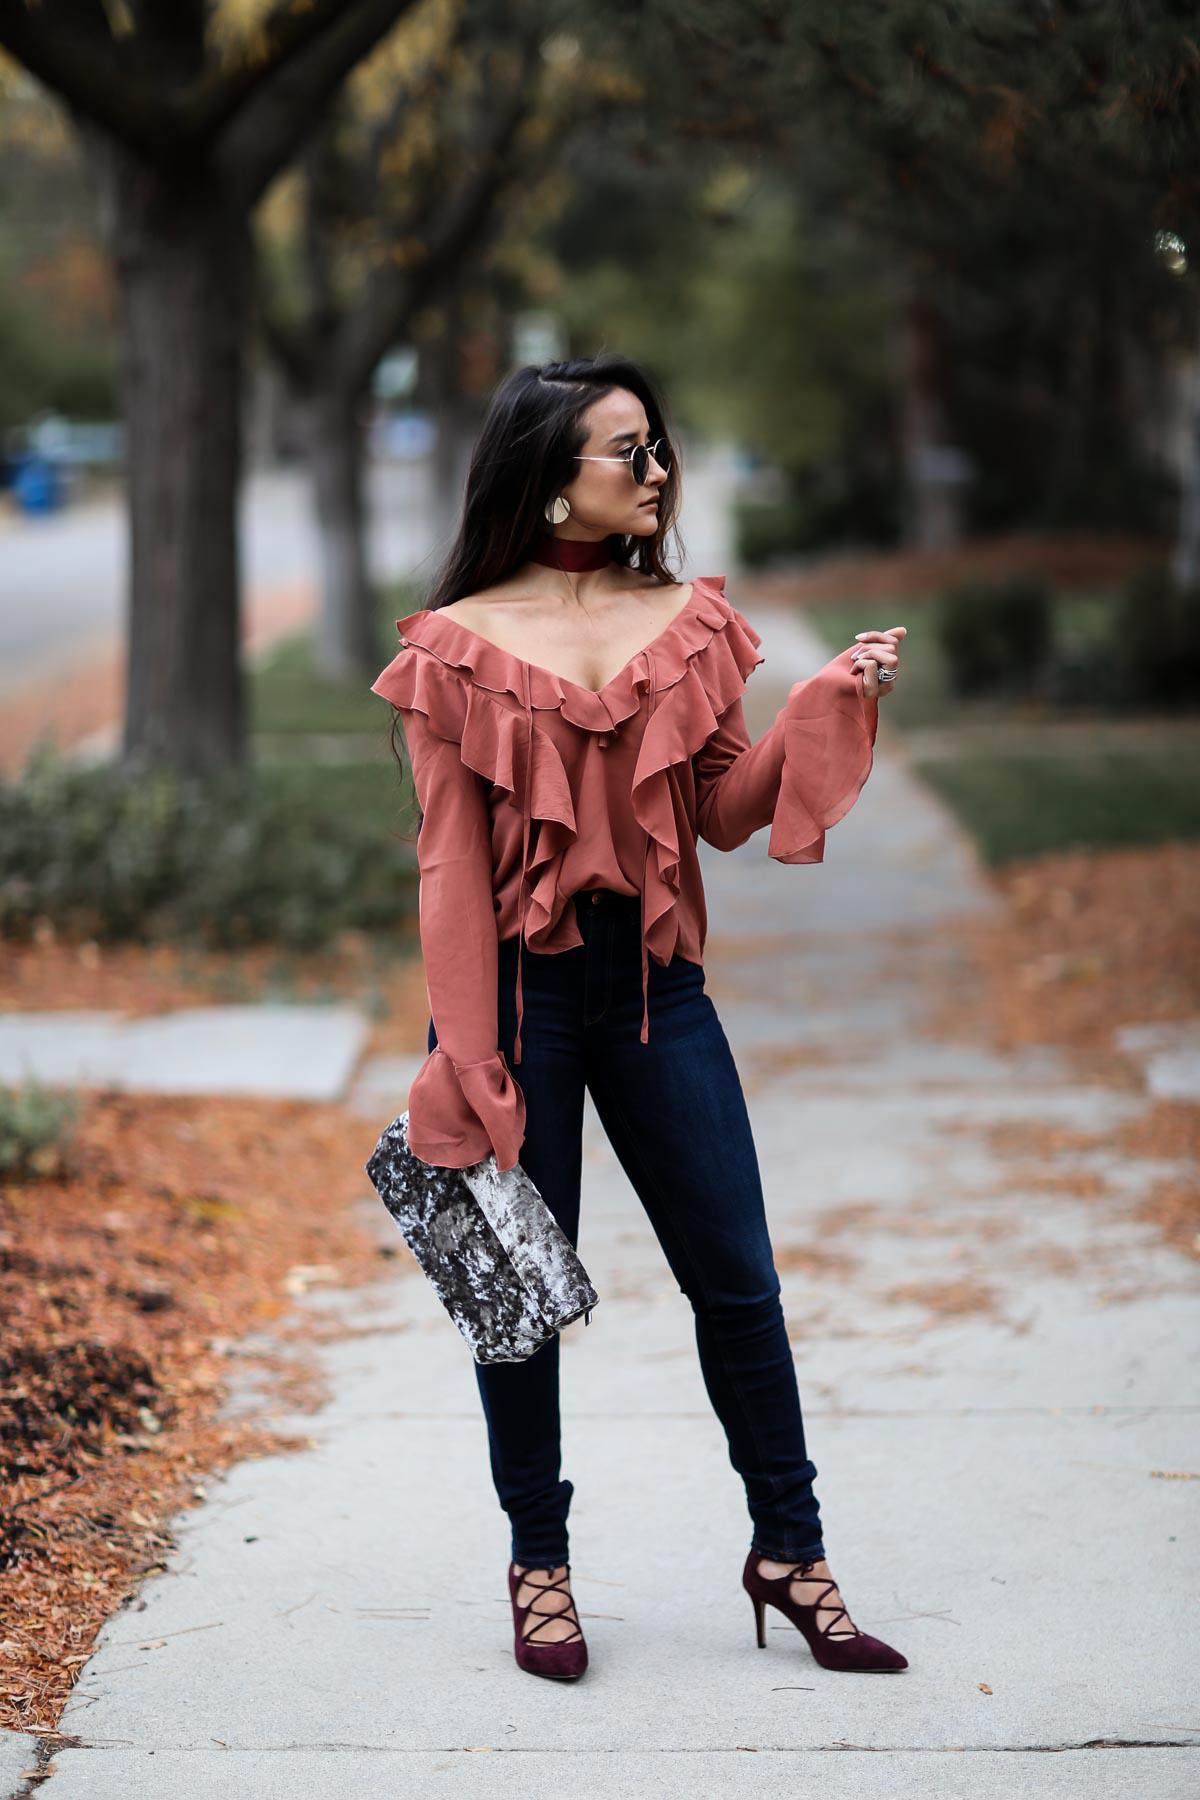 stiletto-confessions-forever21-ruffle-blouse-36